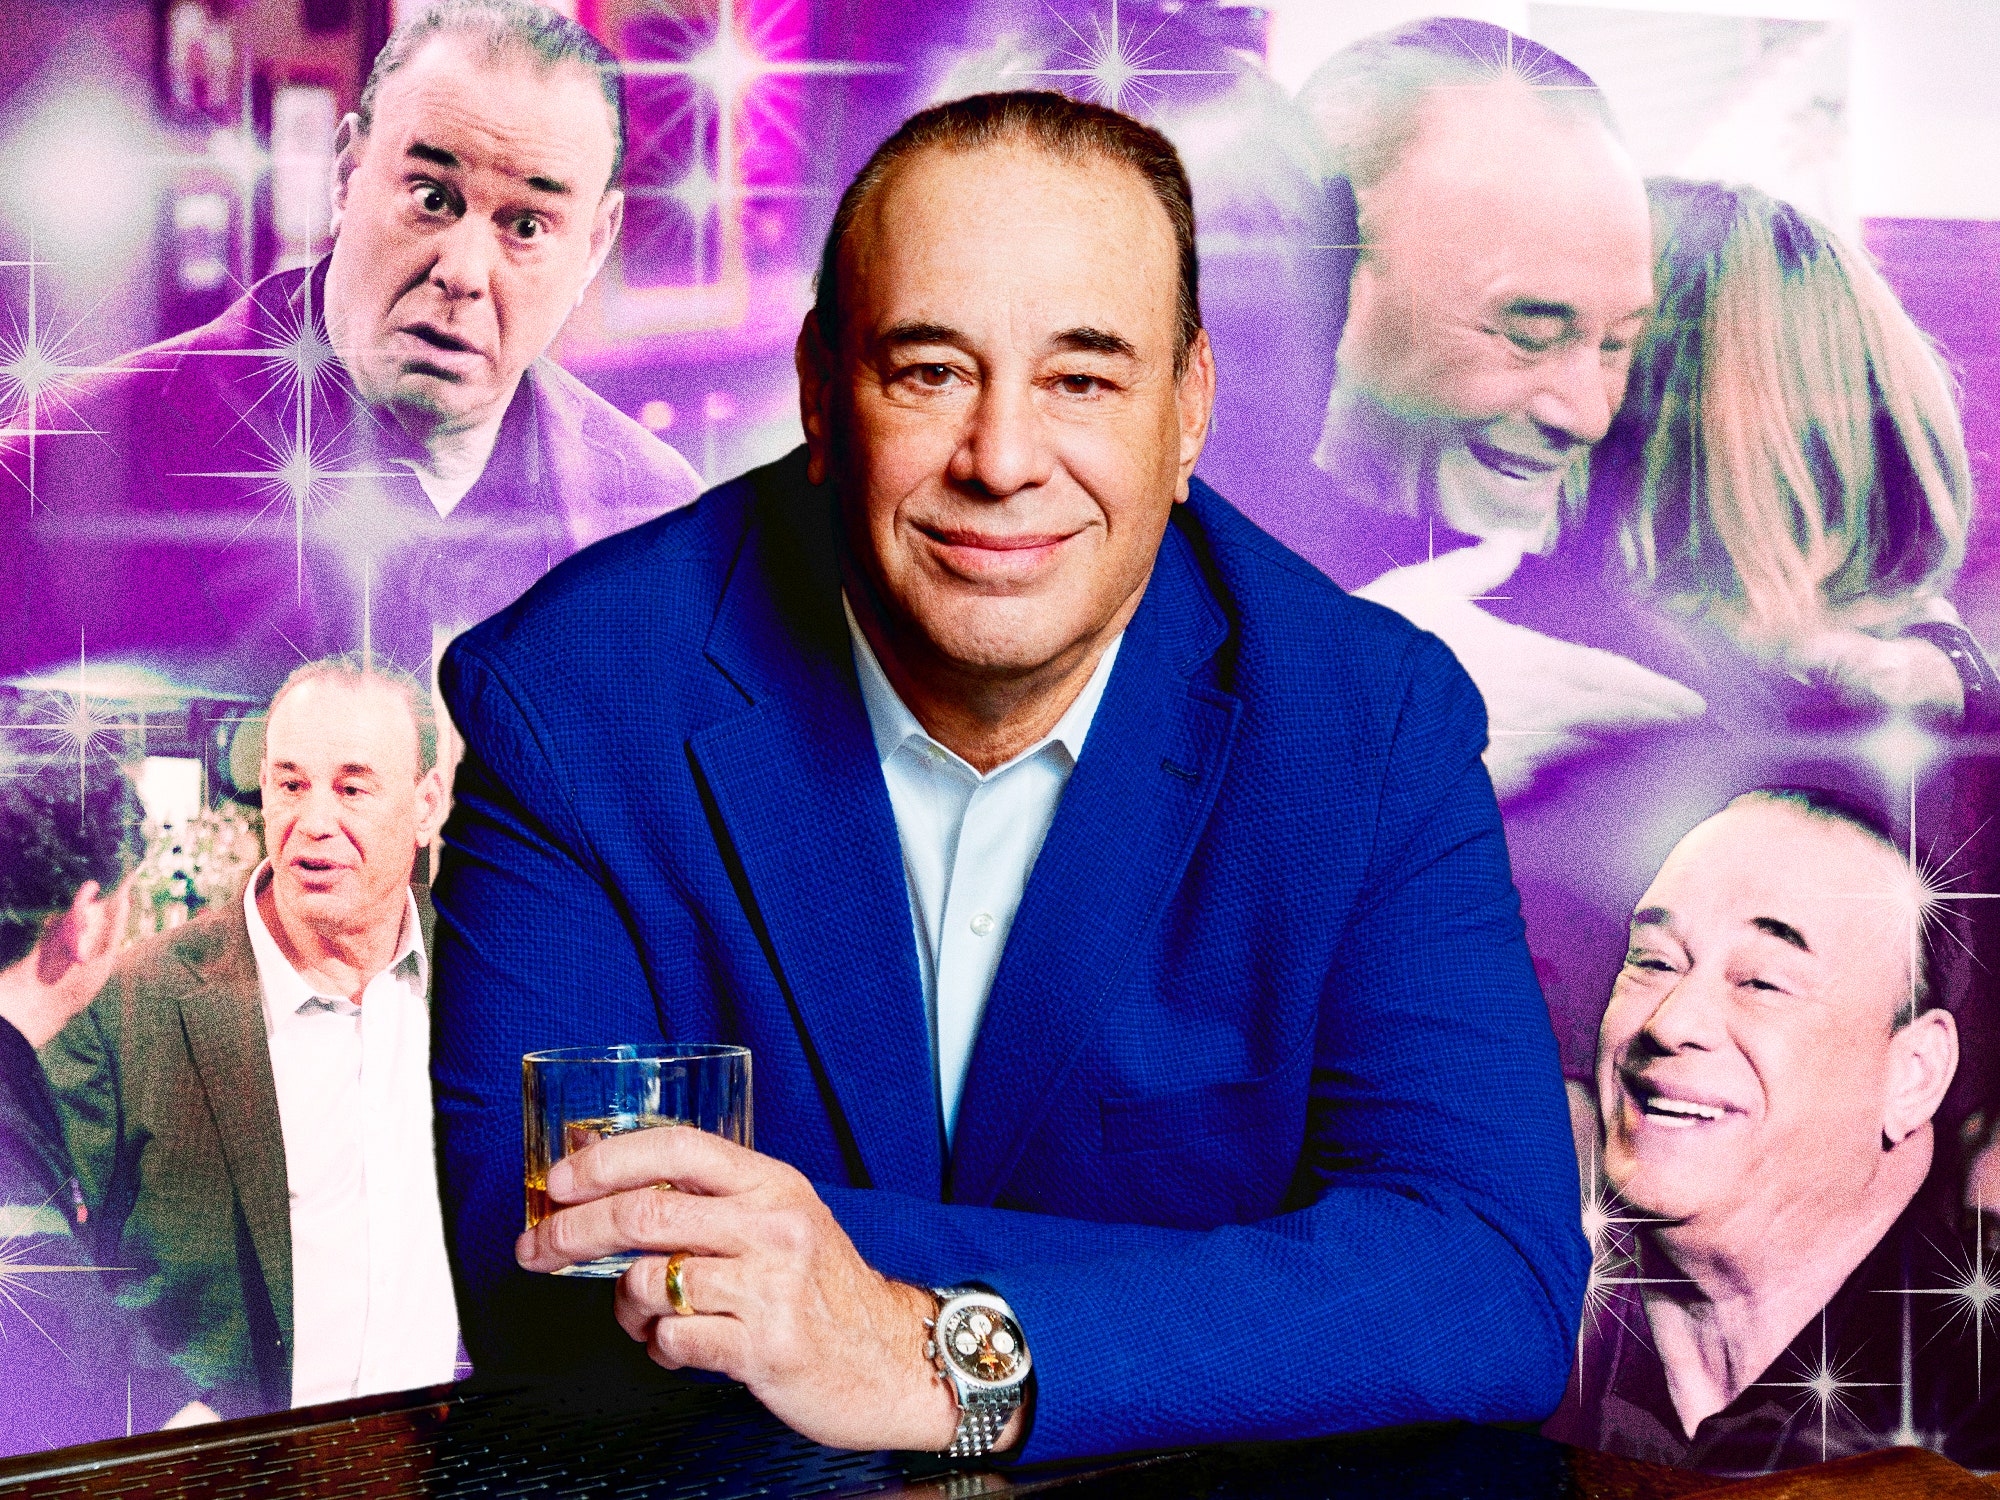 Jon Taffer on 250 Episodes of Bar Rescue, Fungus the Size of Your Freaking Head, and Being a Total Sweetie Pie